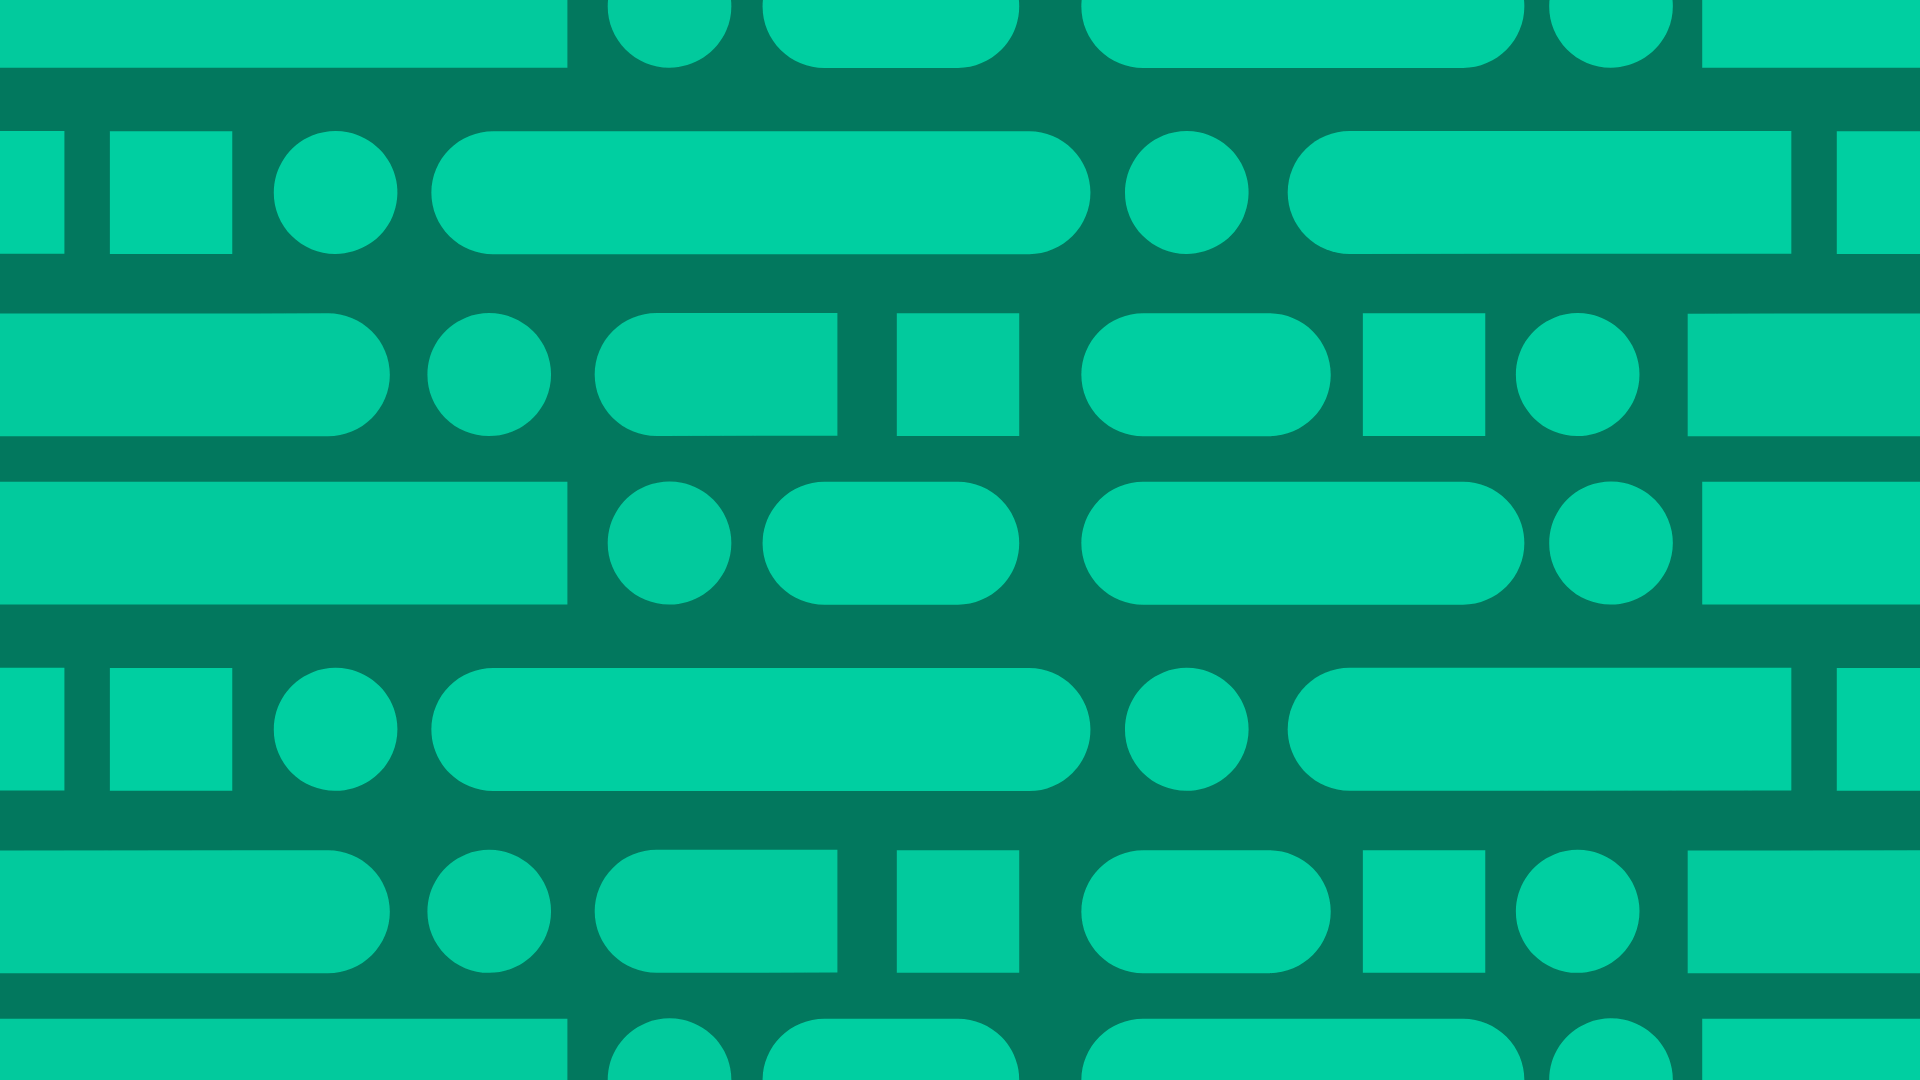 Abstract illustration of green circles and ellipses